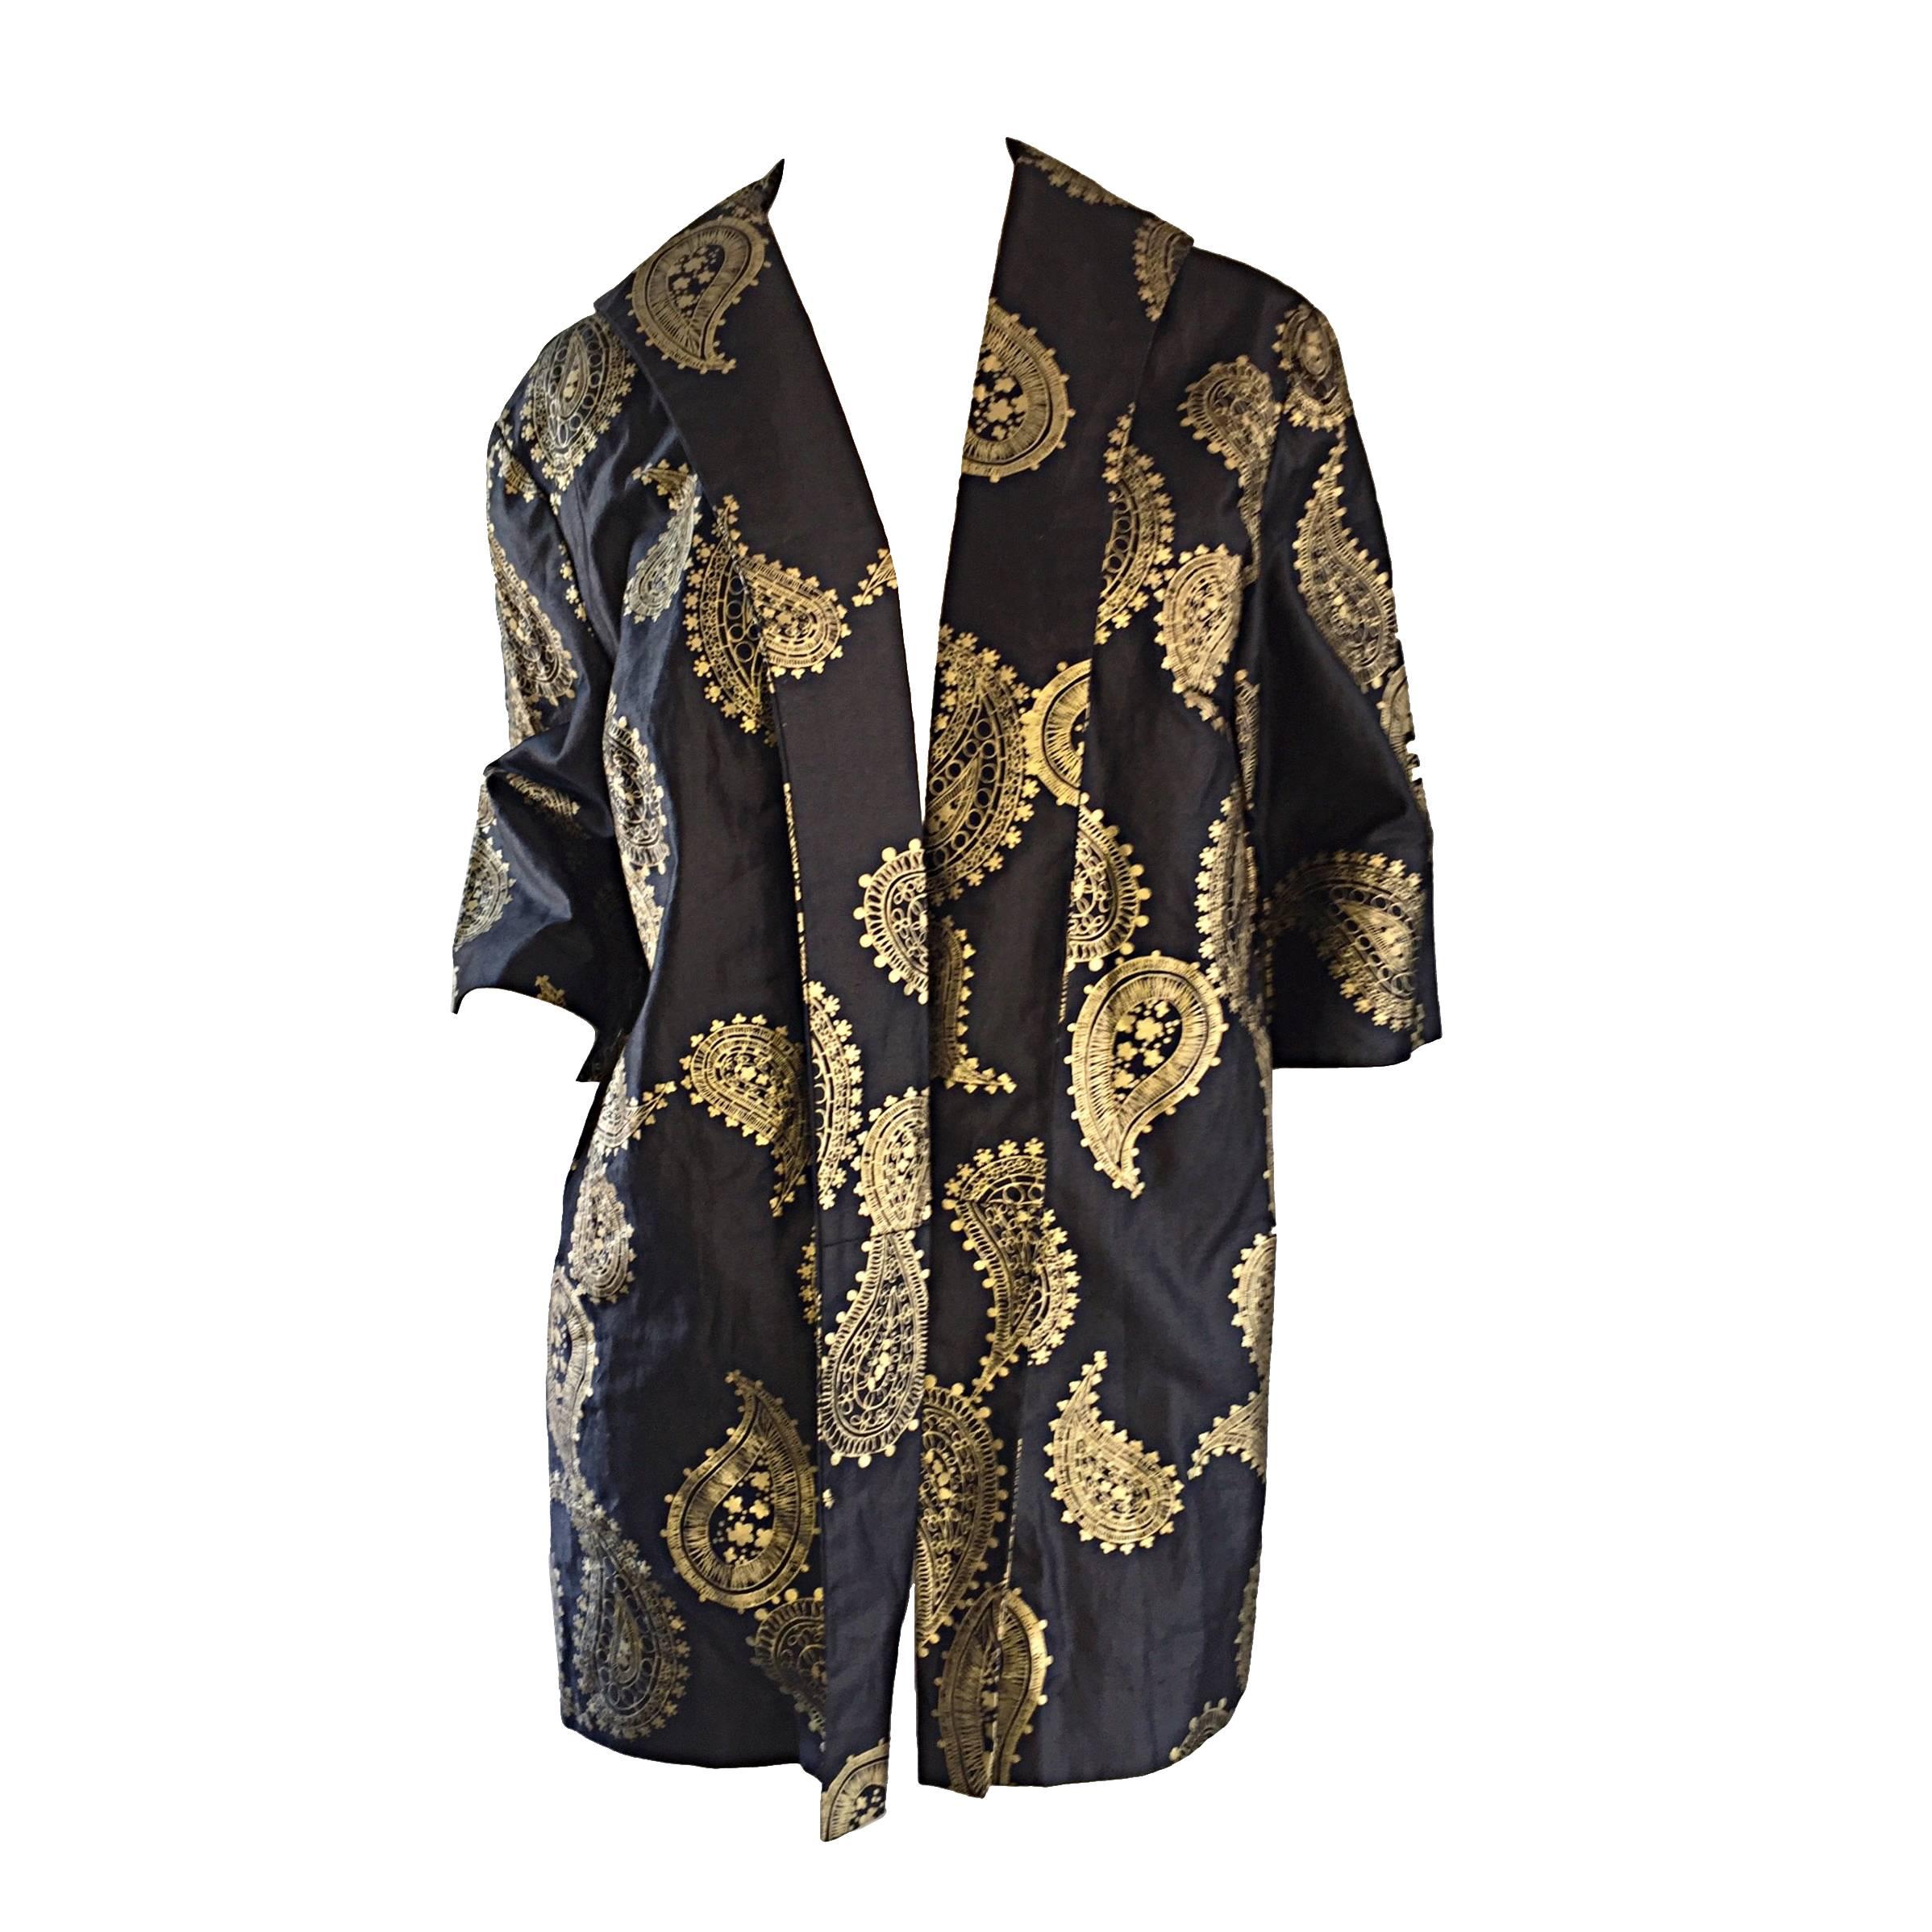 Rare 1950s Alfred Shaheen Vintage 50s Black And Gold Hand Printed Kimono Jacket